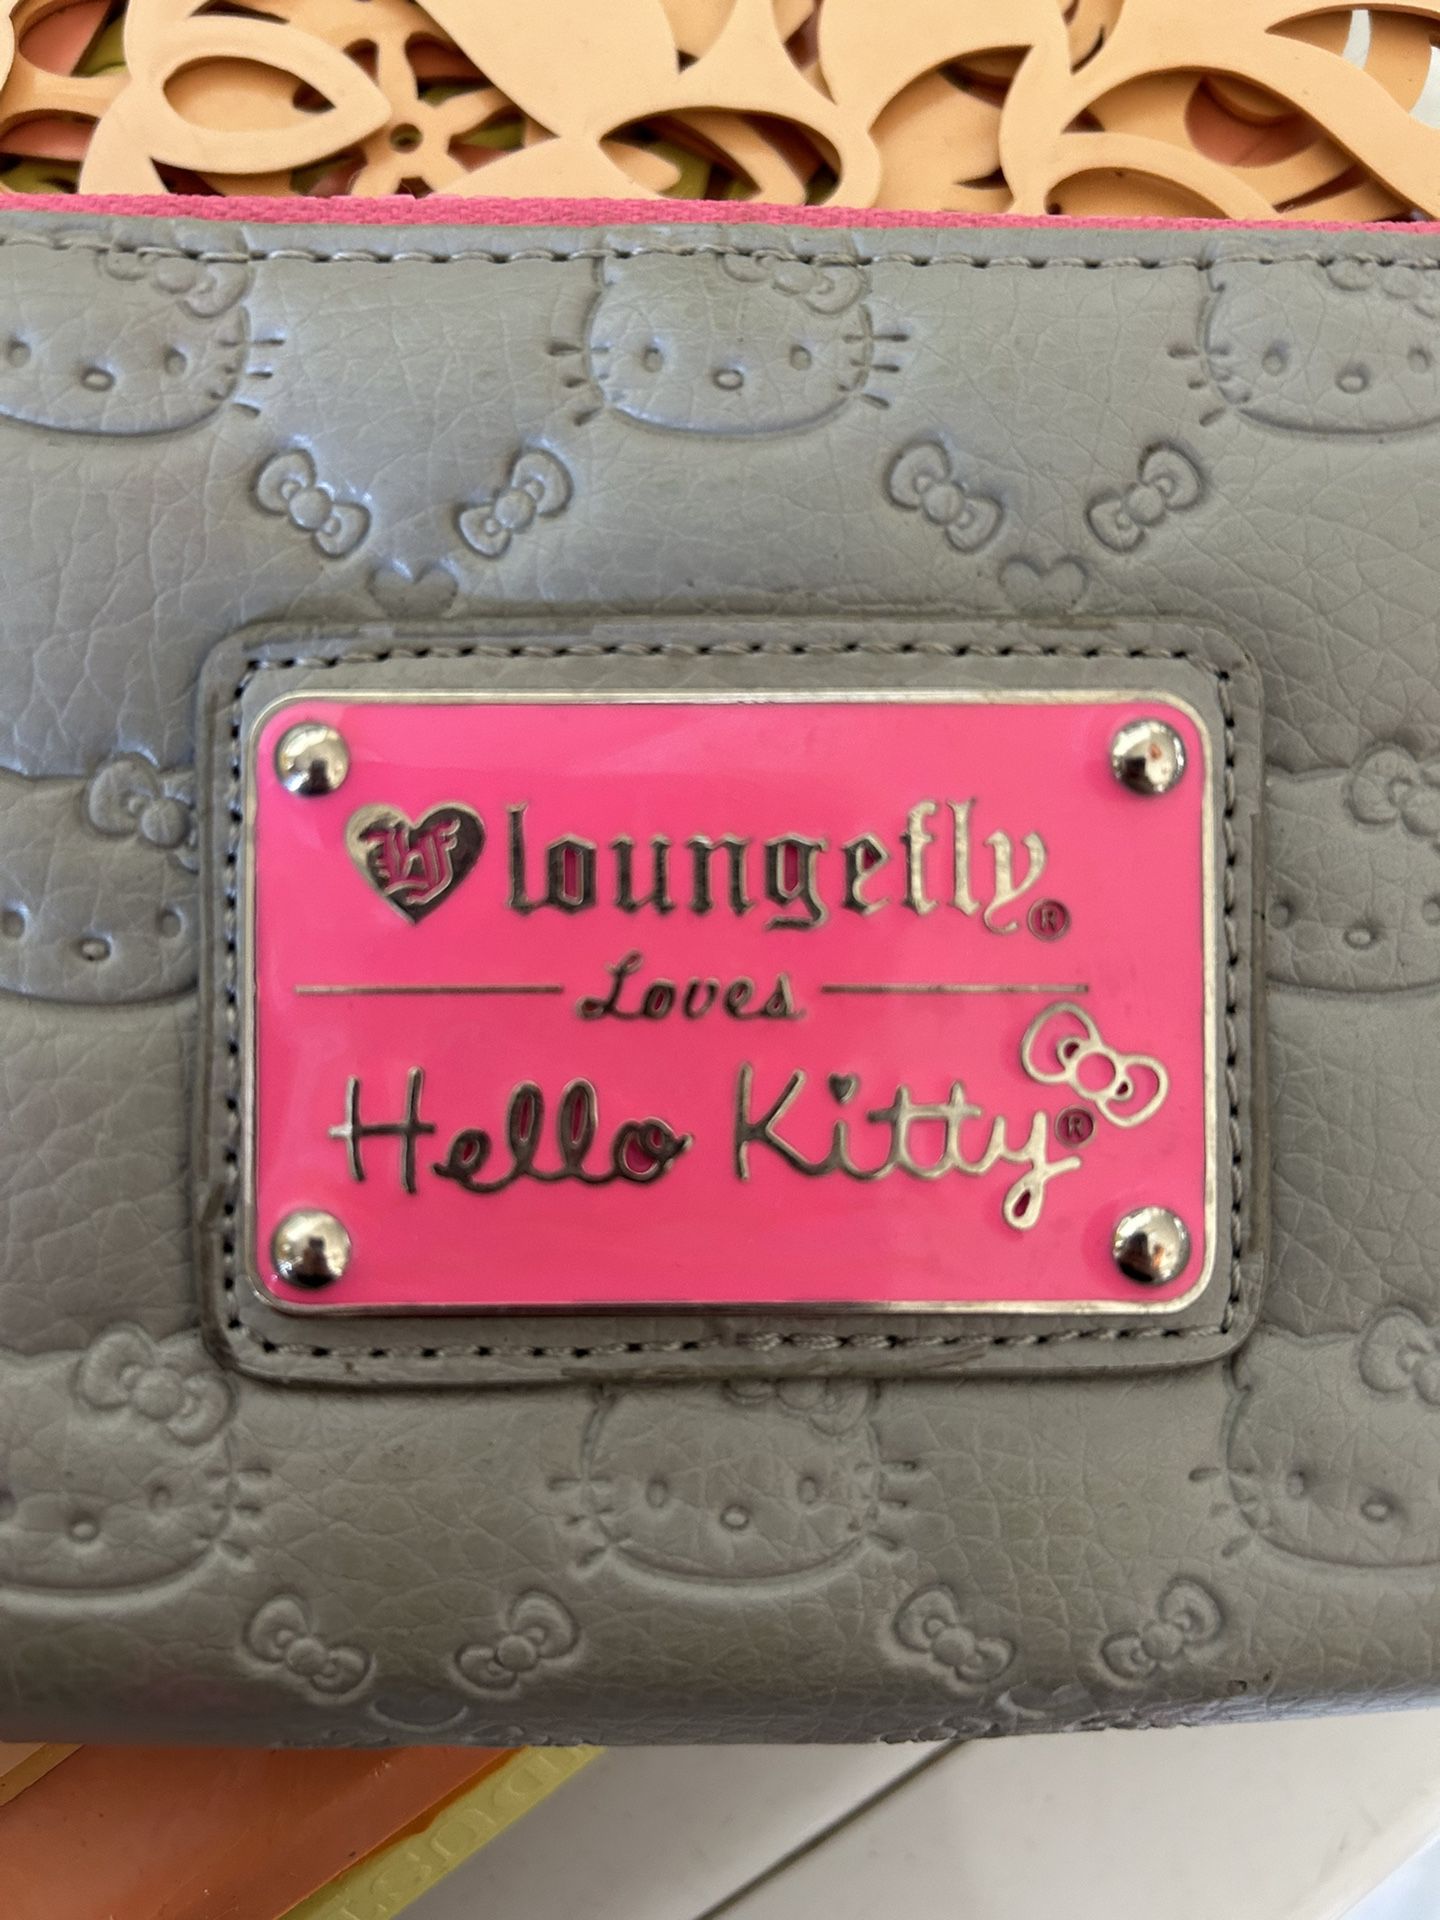 Lounge Fly Hello kitty Wallet 